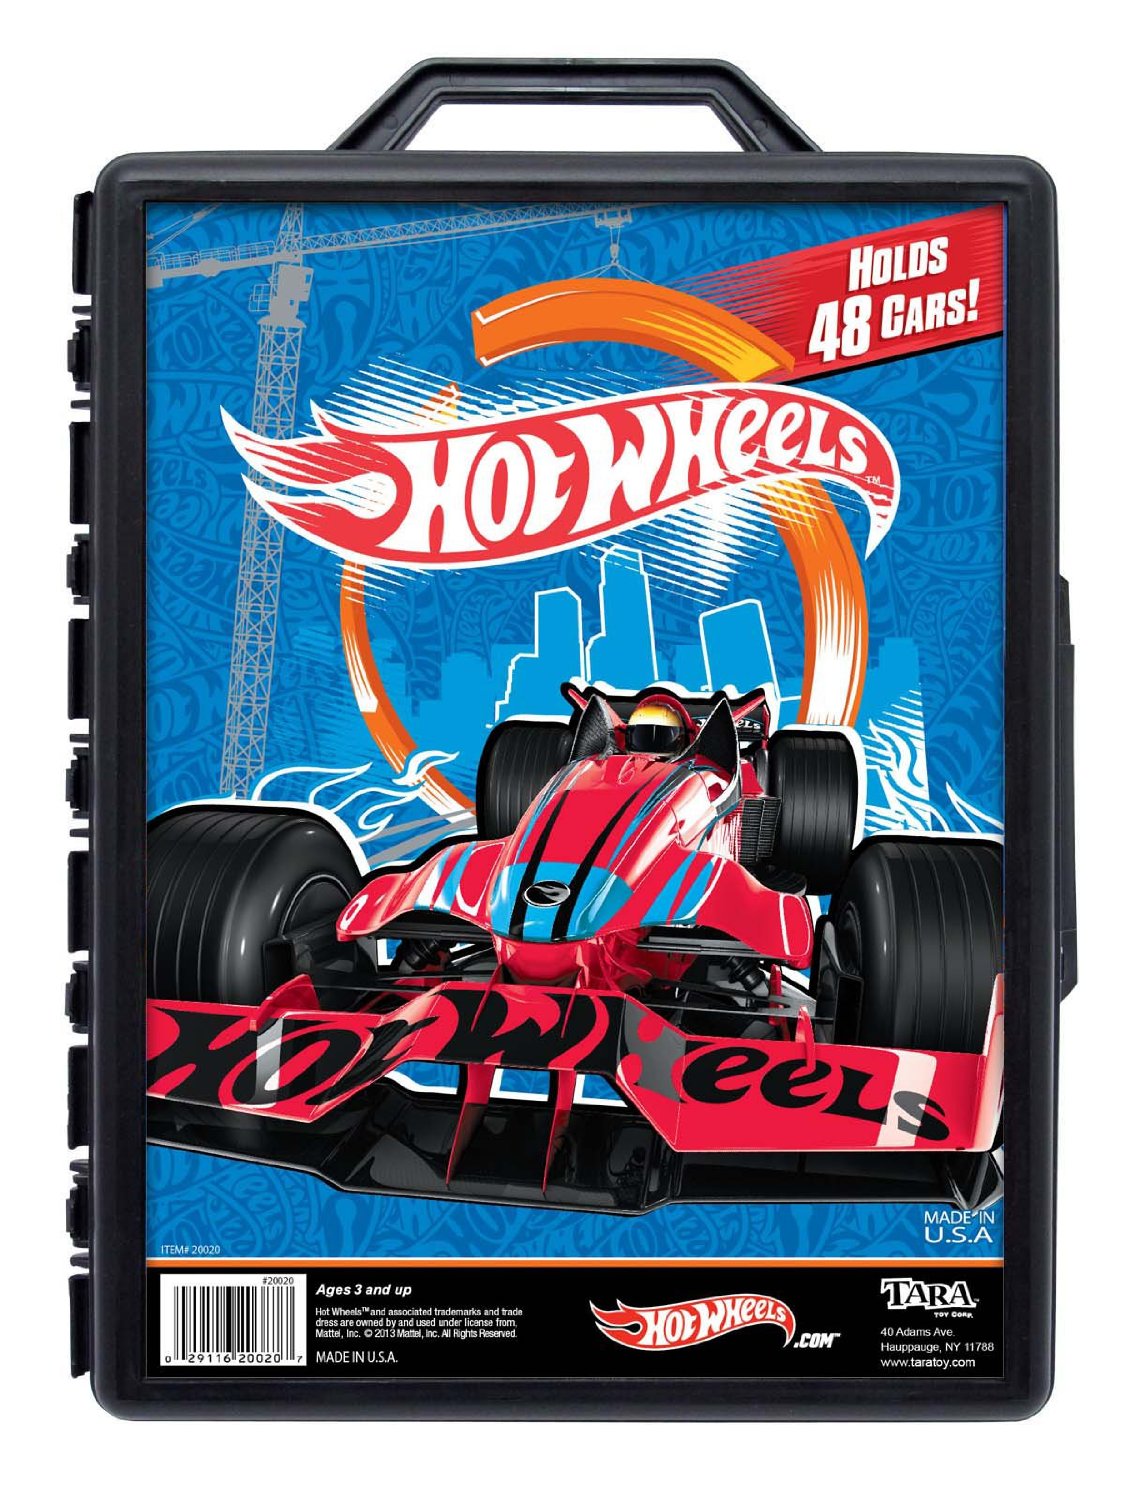 Amazon Reduced Price on Hot Wheel Cars and Case